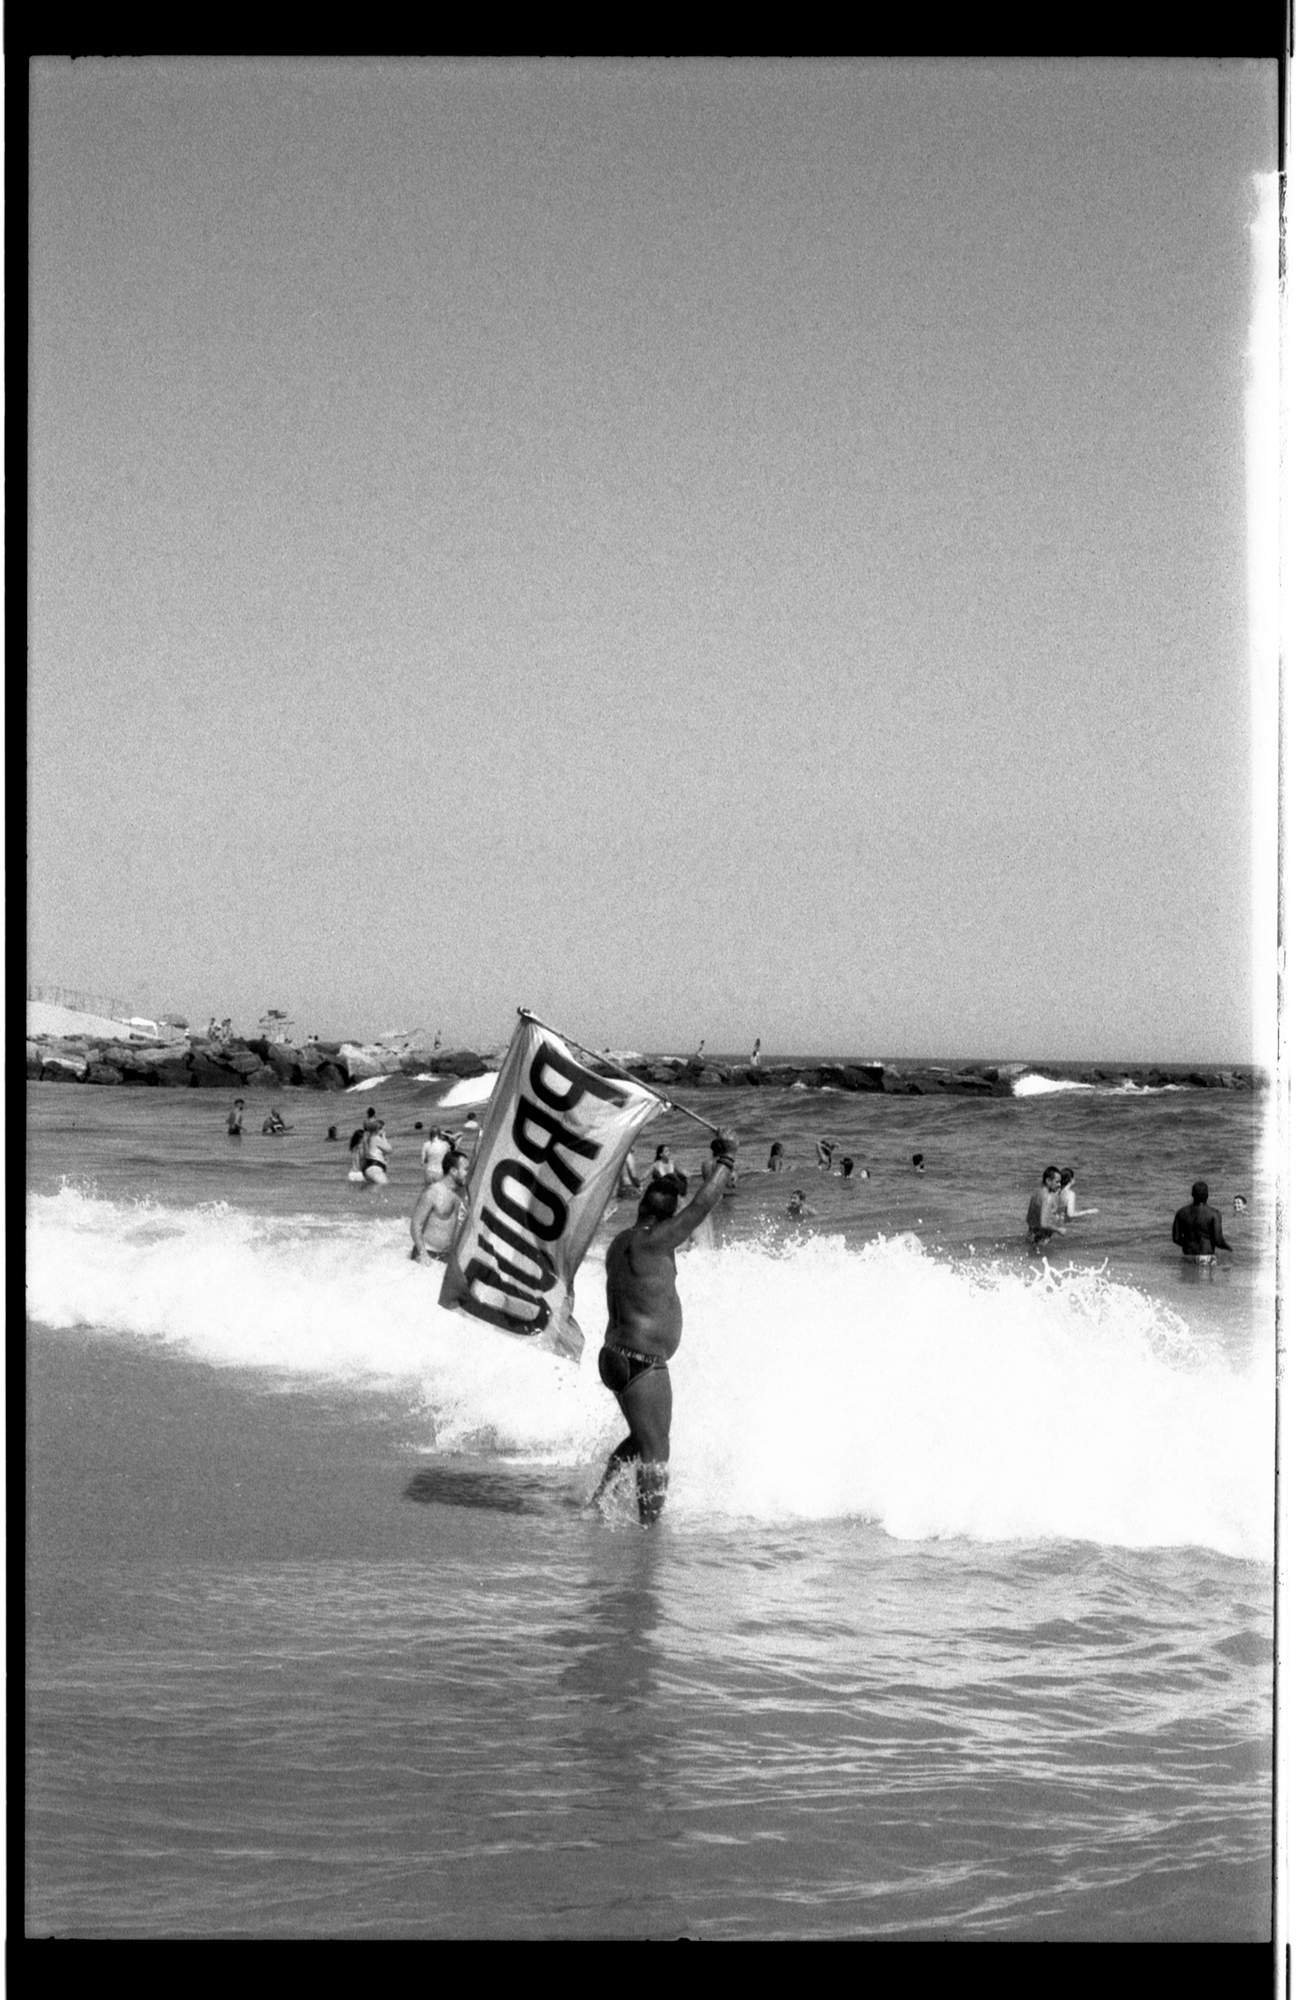 A speedo-clad bather wades into the surf at Riis Beach, carrying a large flag displaying the word "PROUD."